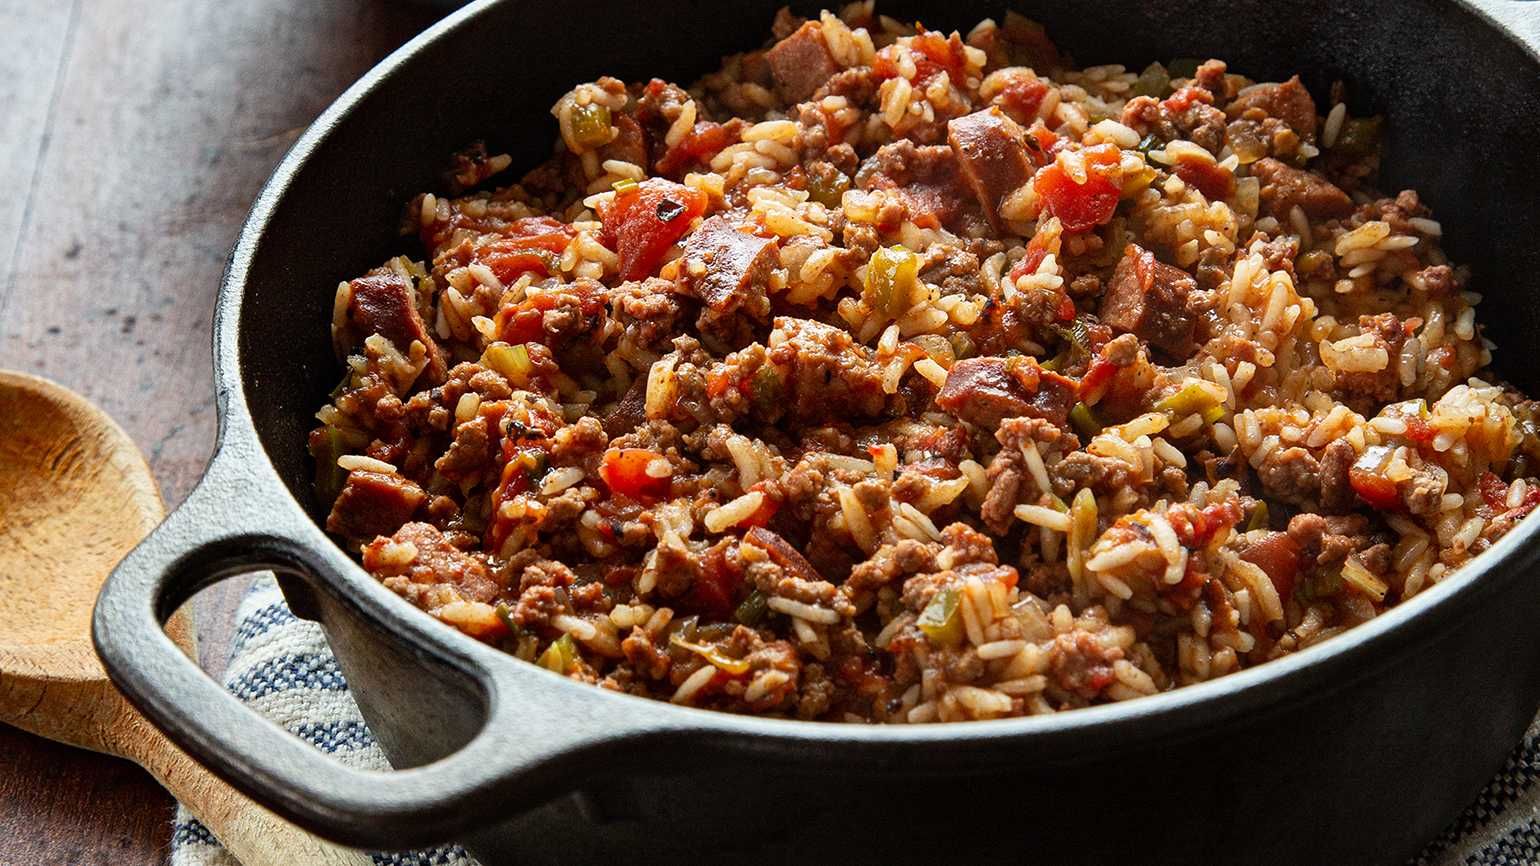 Scott McCown's Jambalaya (photo by Angie Mosier Placemat Productions)